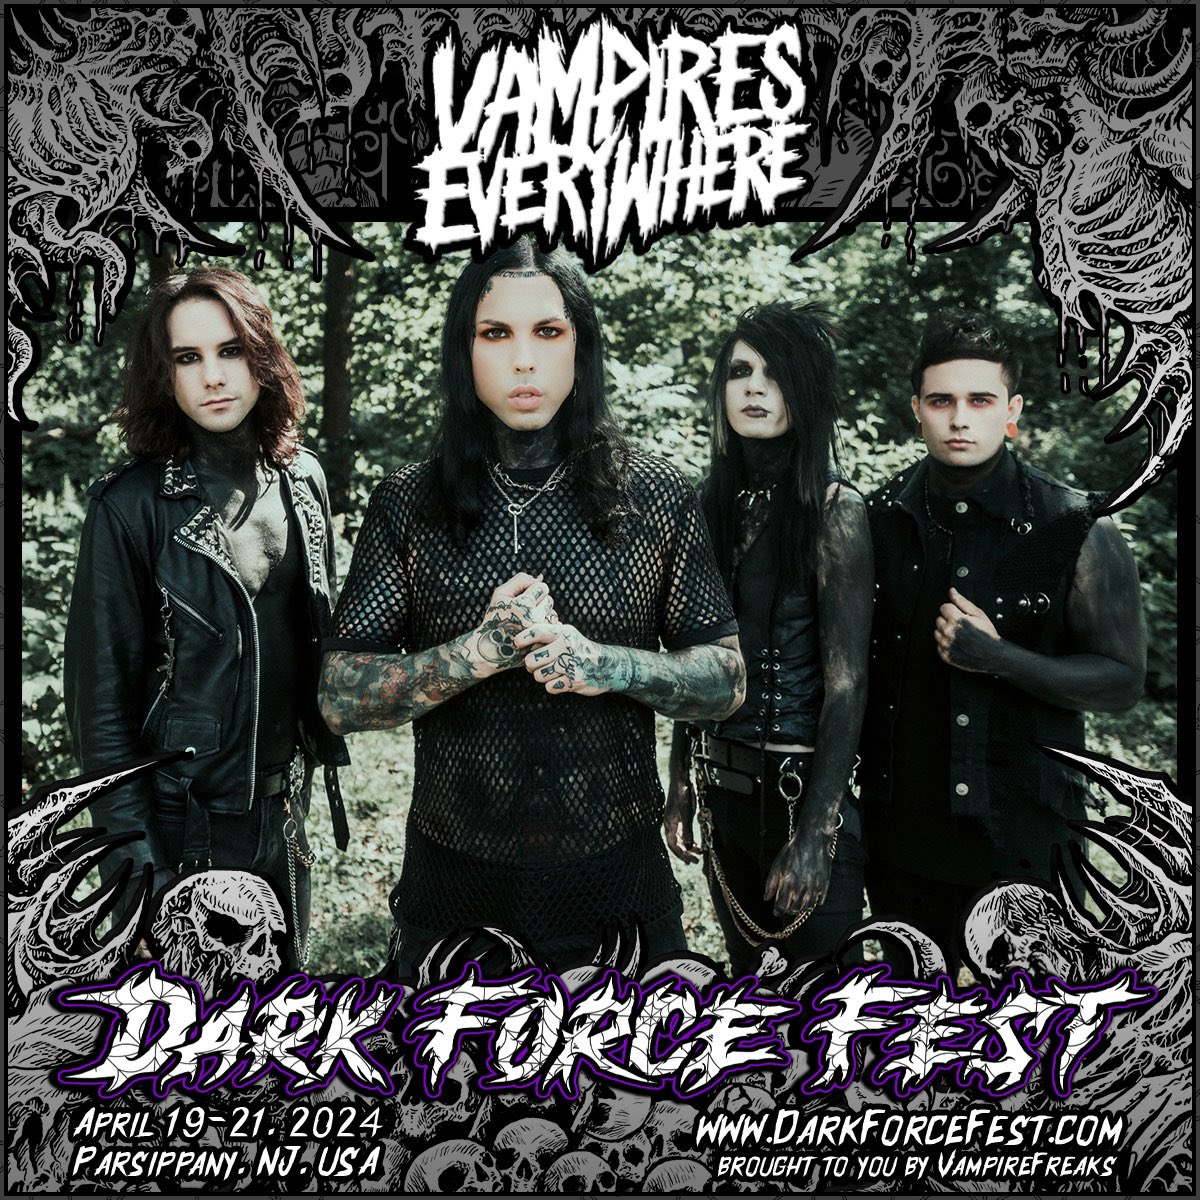 See you at @darkforcefest 2024
Big shout out to @VampireFreaks 🖤

See you in NJ next April! 🦇